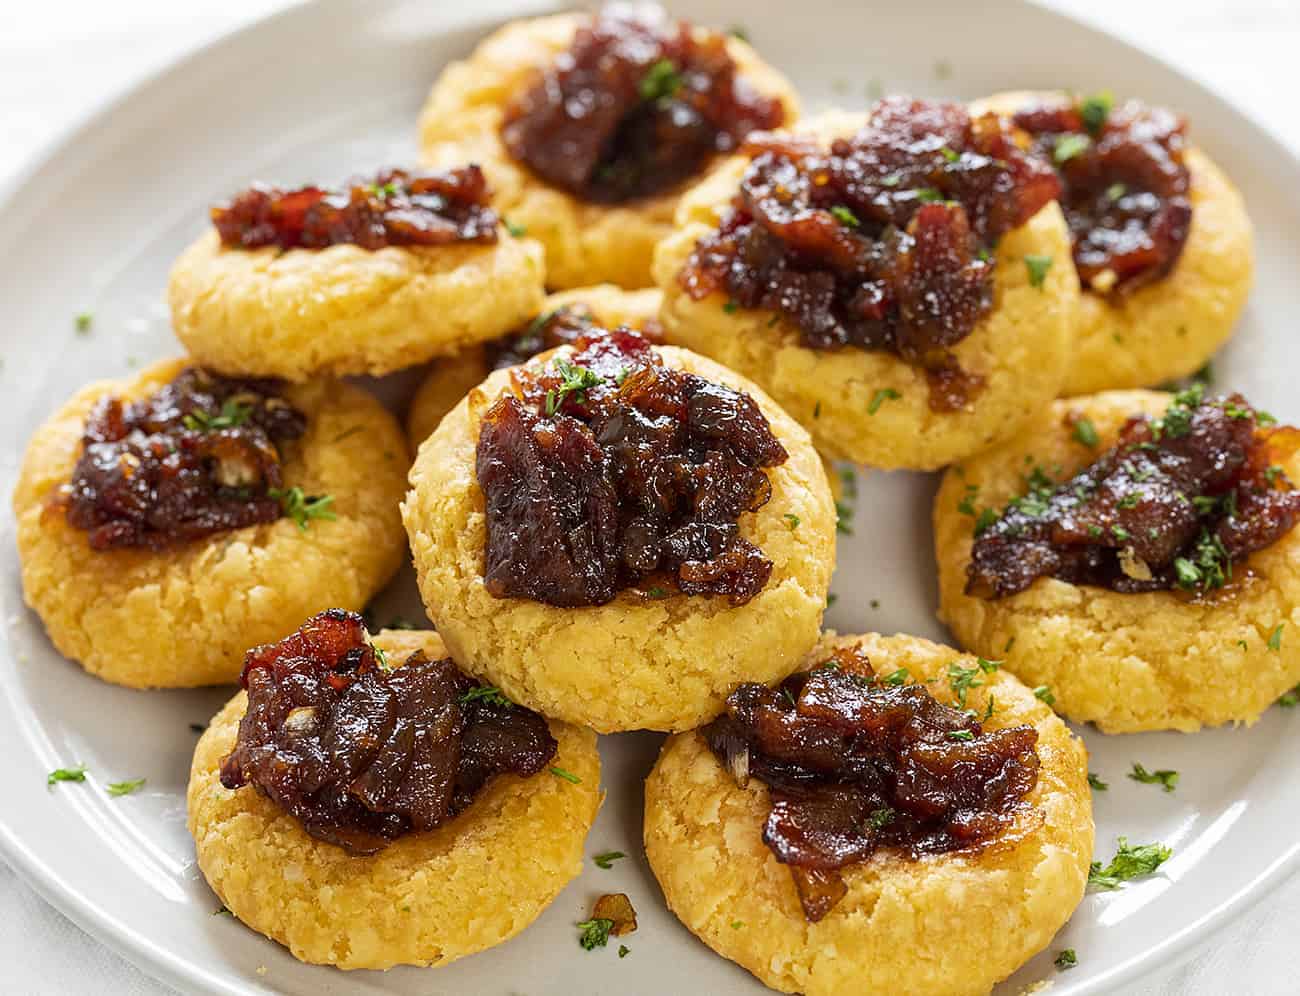 Cheesy Thumbprint Appetizers on a Plate